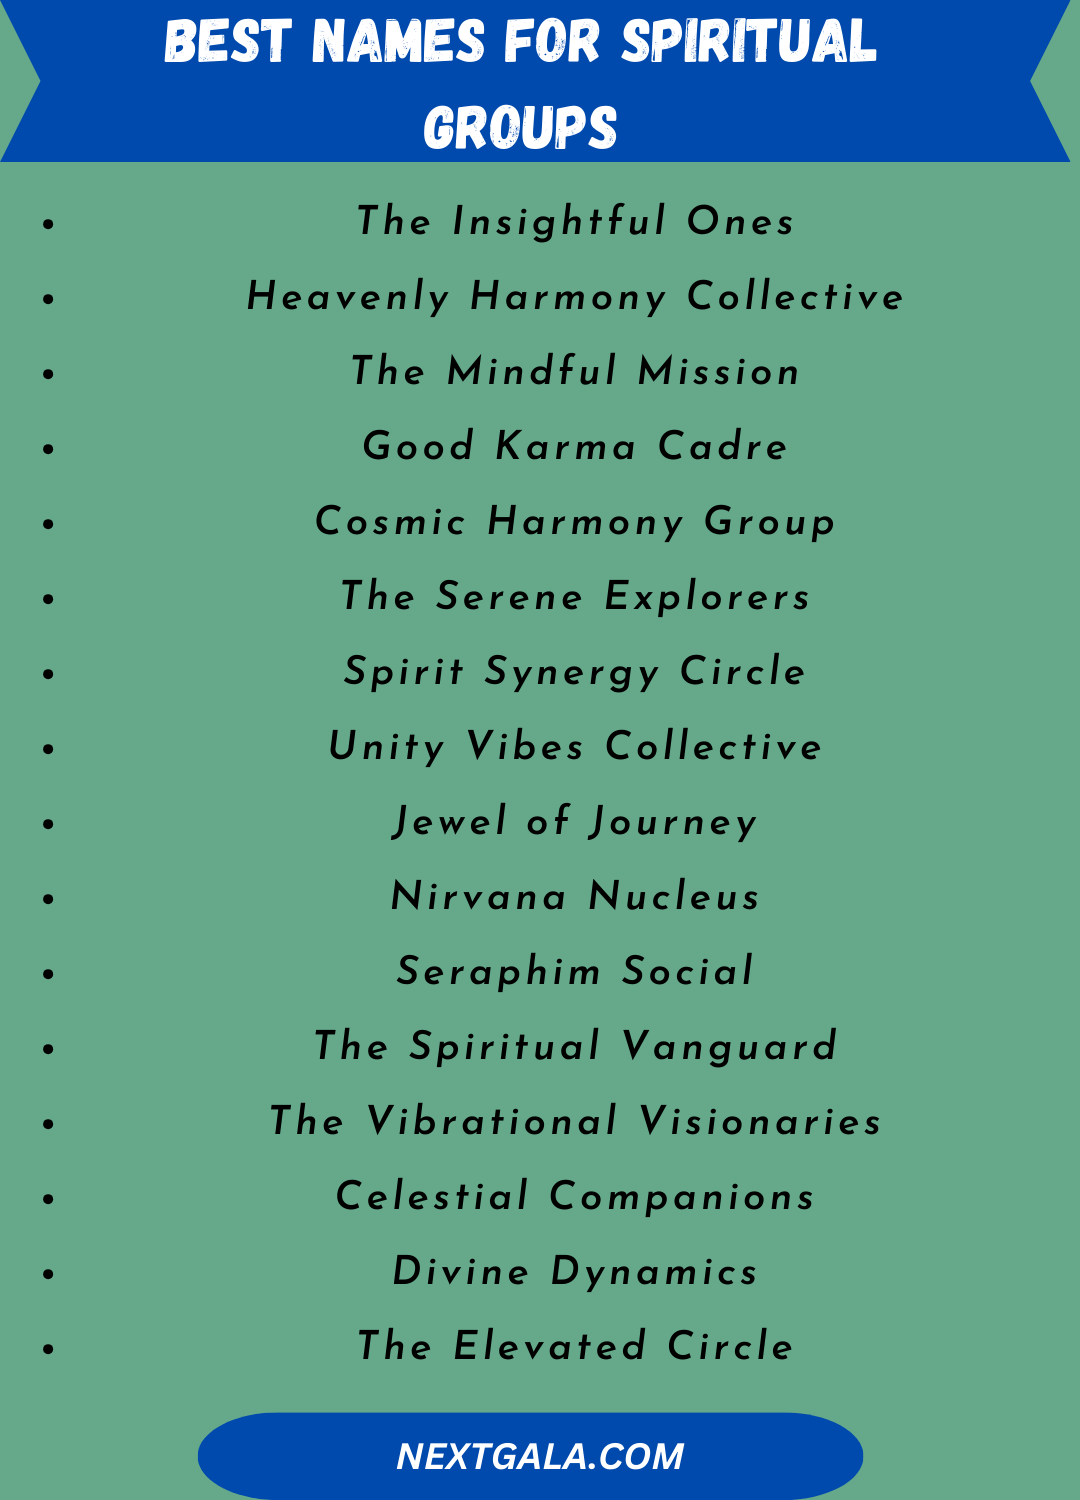 Best Names for Spiritual Groups